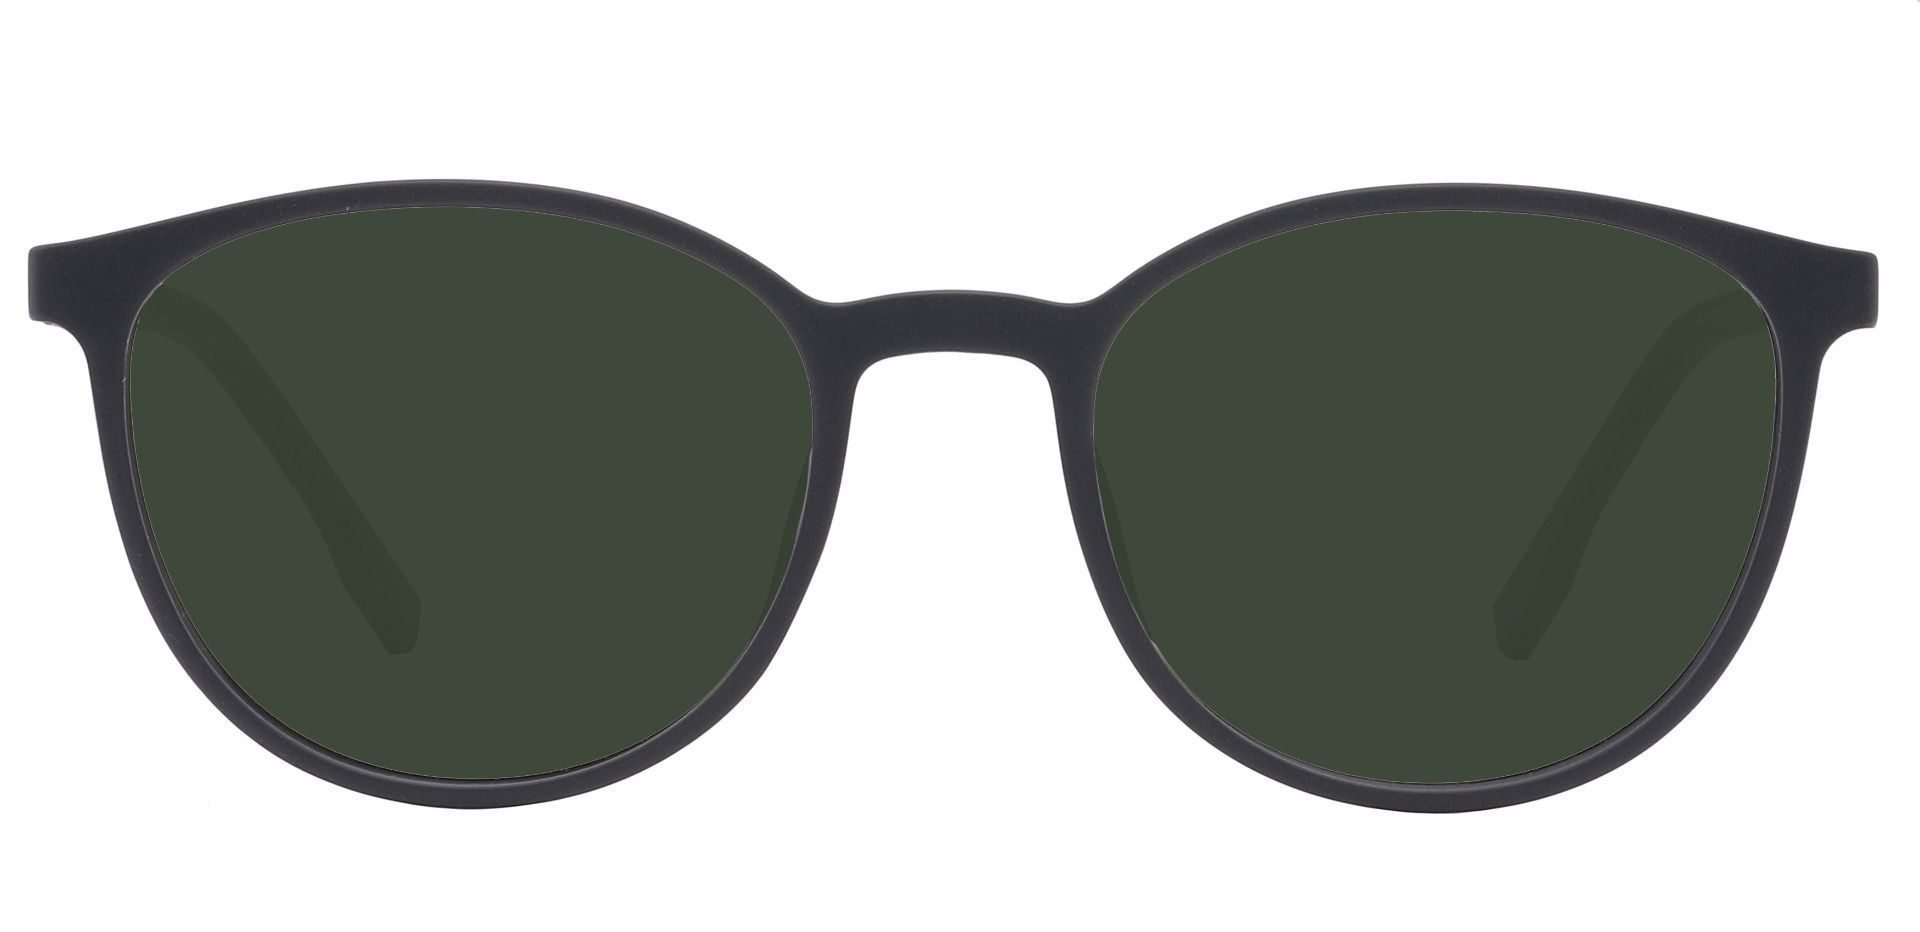 Bay Round Non-Rx Sunglasses - Black Frame With Green Lenses